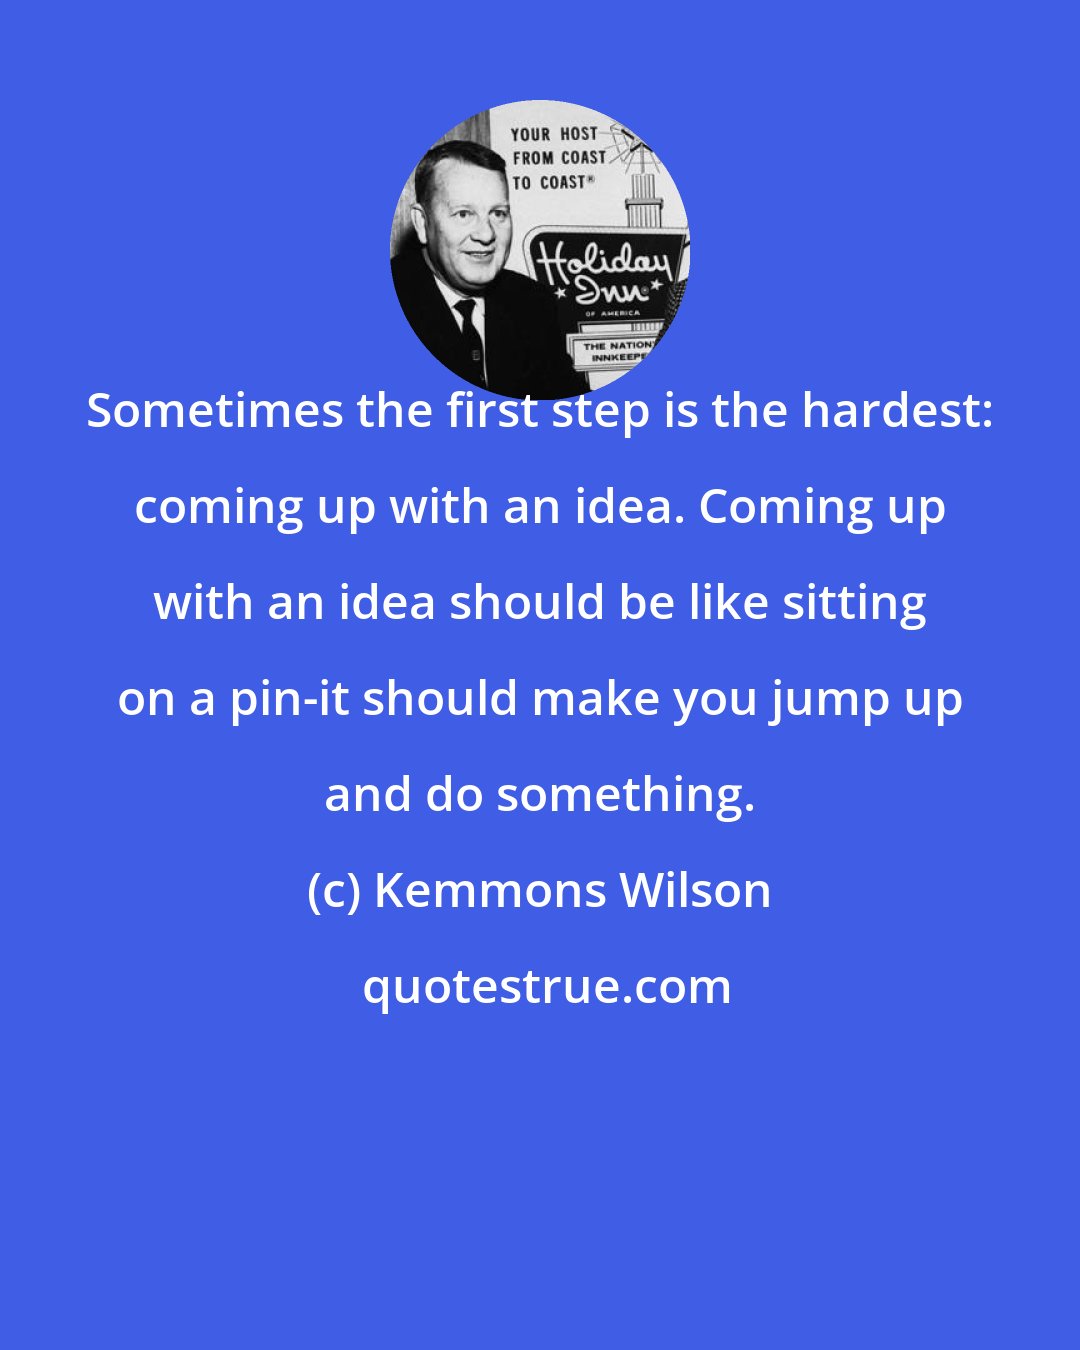 Kemmons Wilson: Sometimes the first step is the hardest: coming up with an idea. Coming up with an idea should be like sitting on a pin-it should make you jump up and do something.